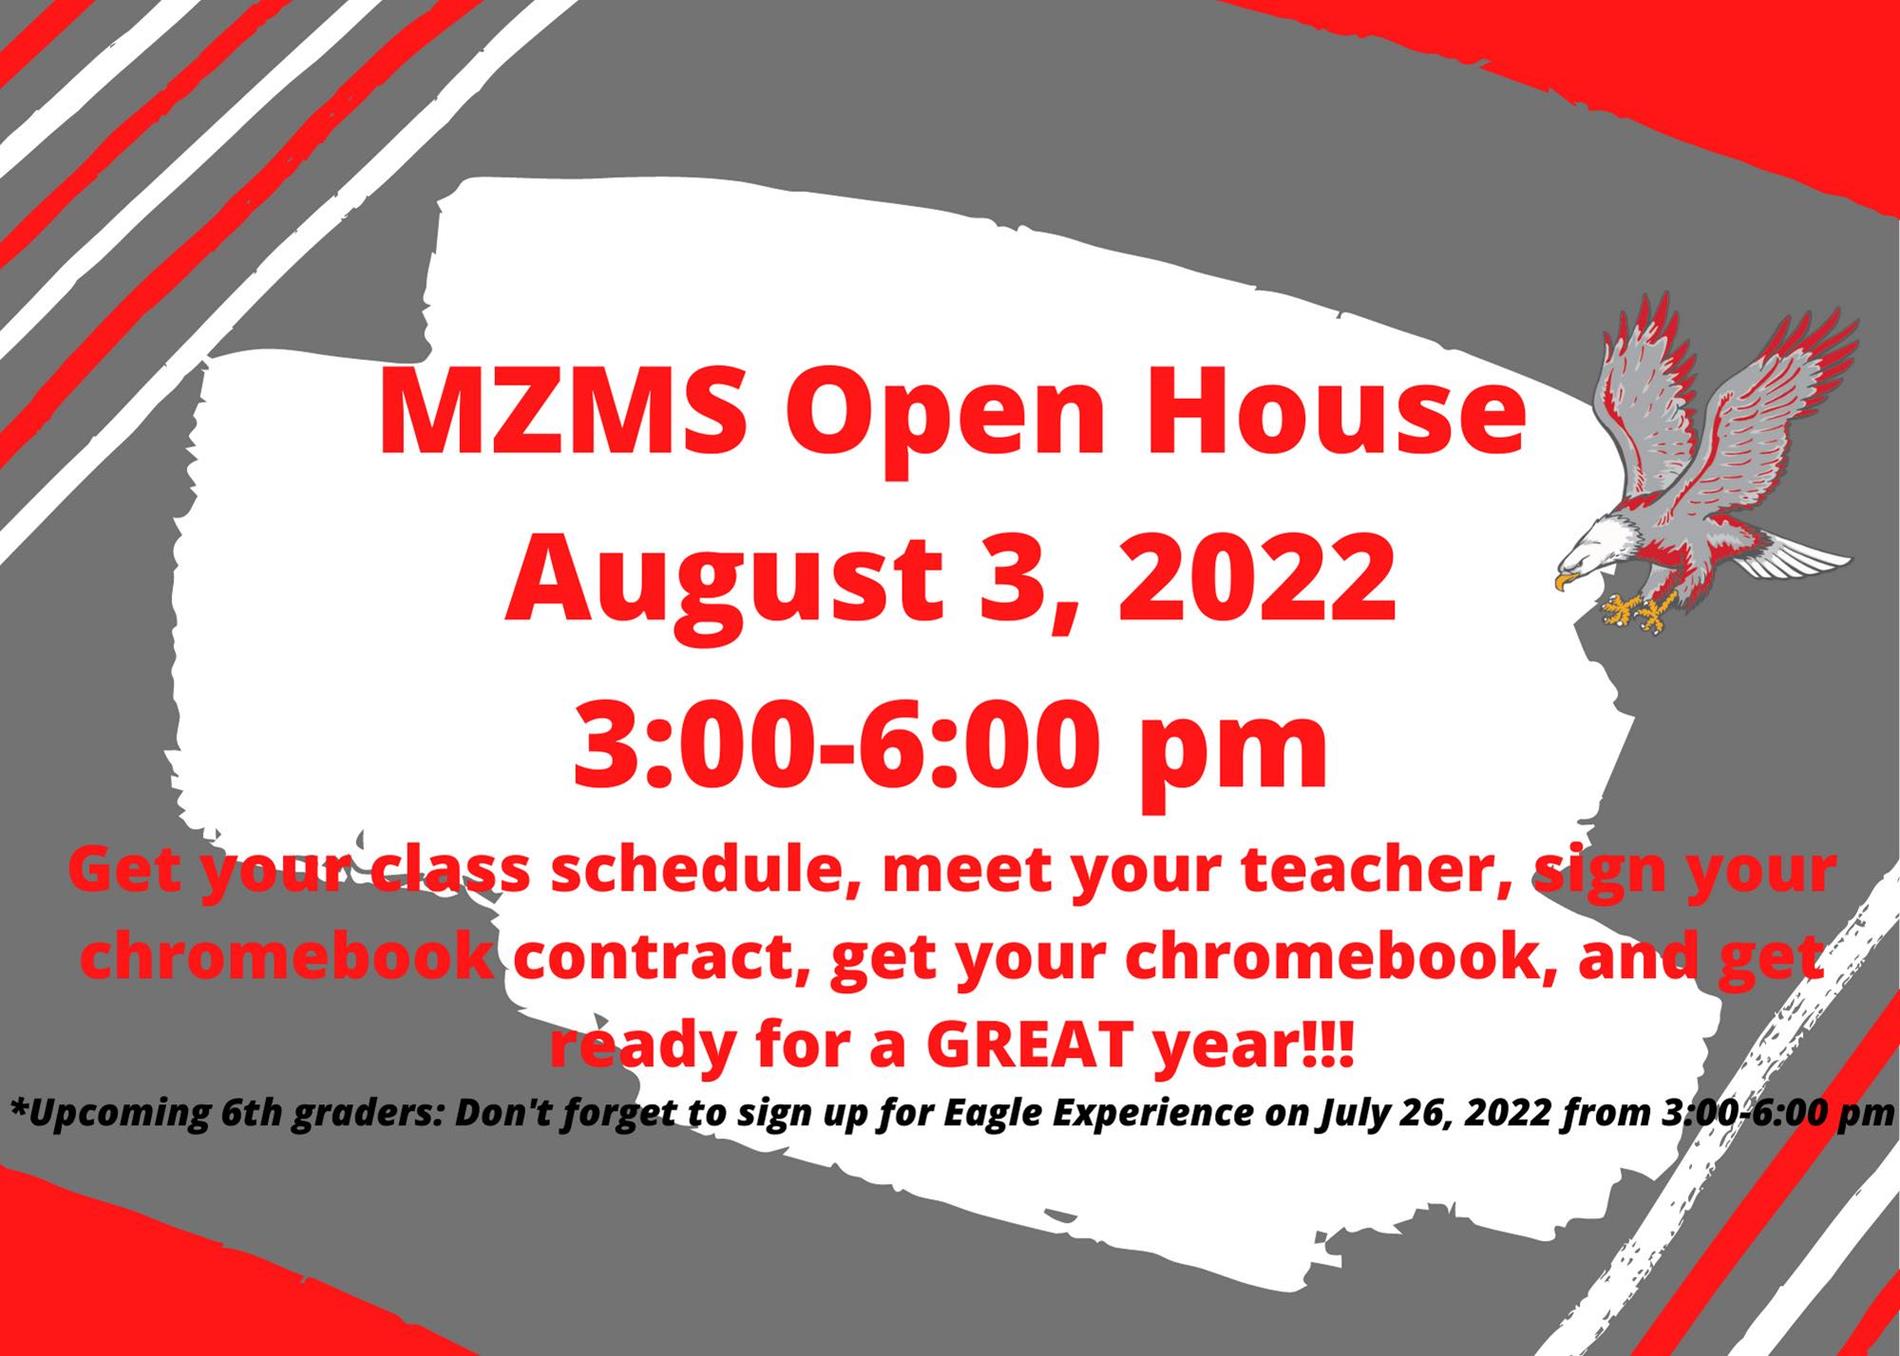 MZMS Open House